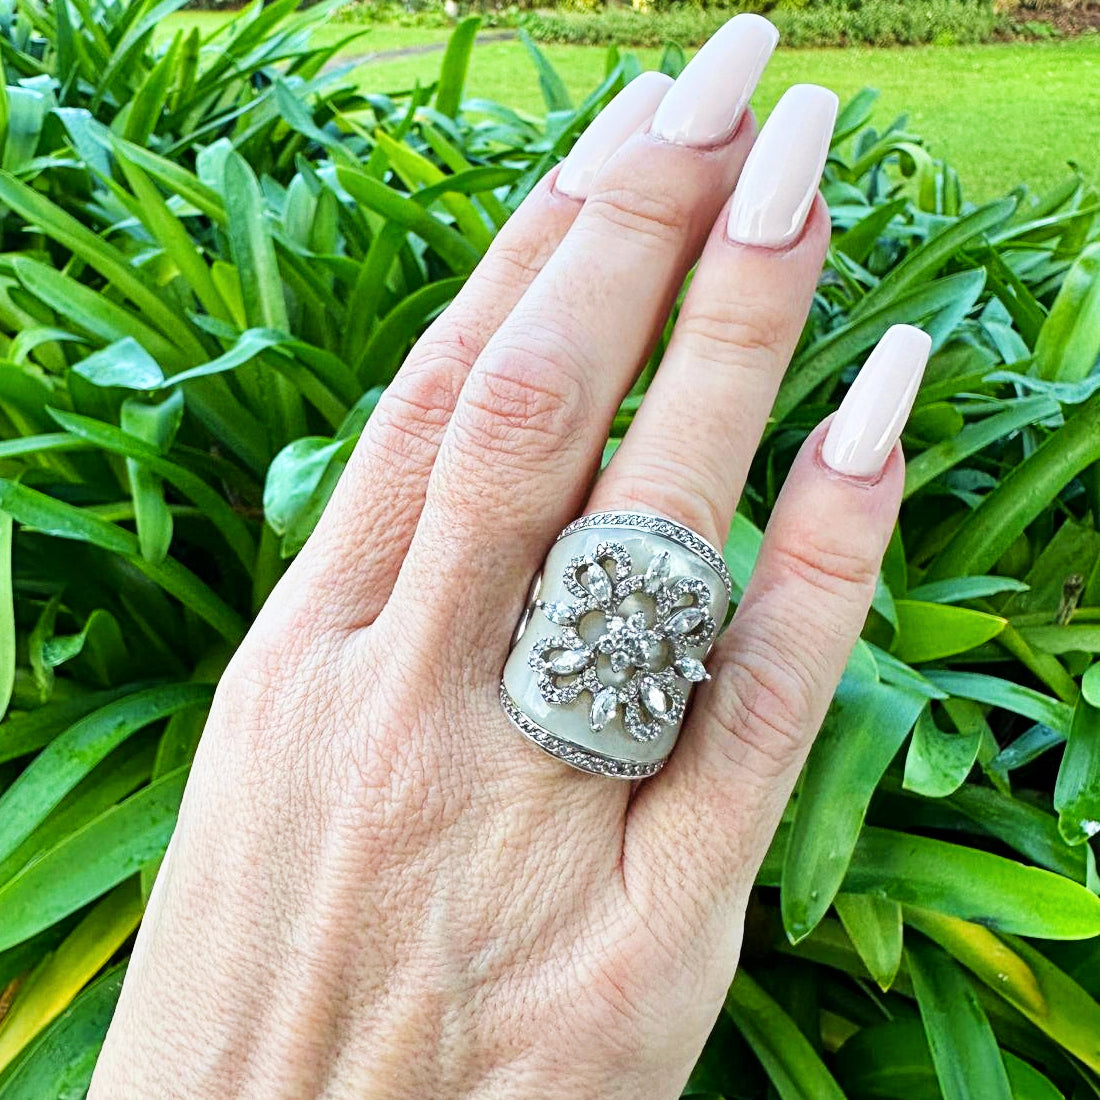 Tuscan Sun Ring in 925 Sterling Silver with polished Mother of Pearl & Cubic Zirconia stones in a sun design. Worldwide shipping with FREE shipping within Australia. Affordable luxury jewellery by Bellagio & Co.